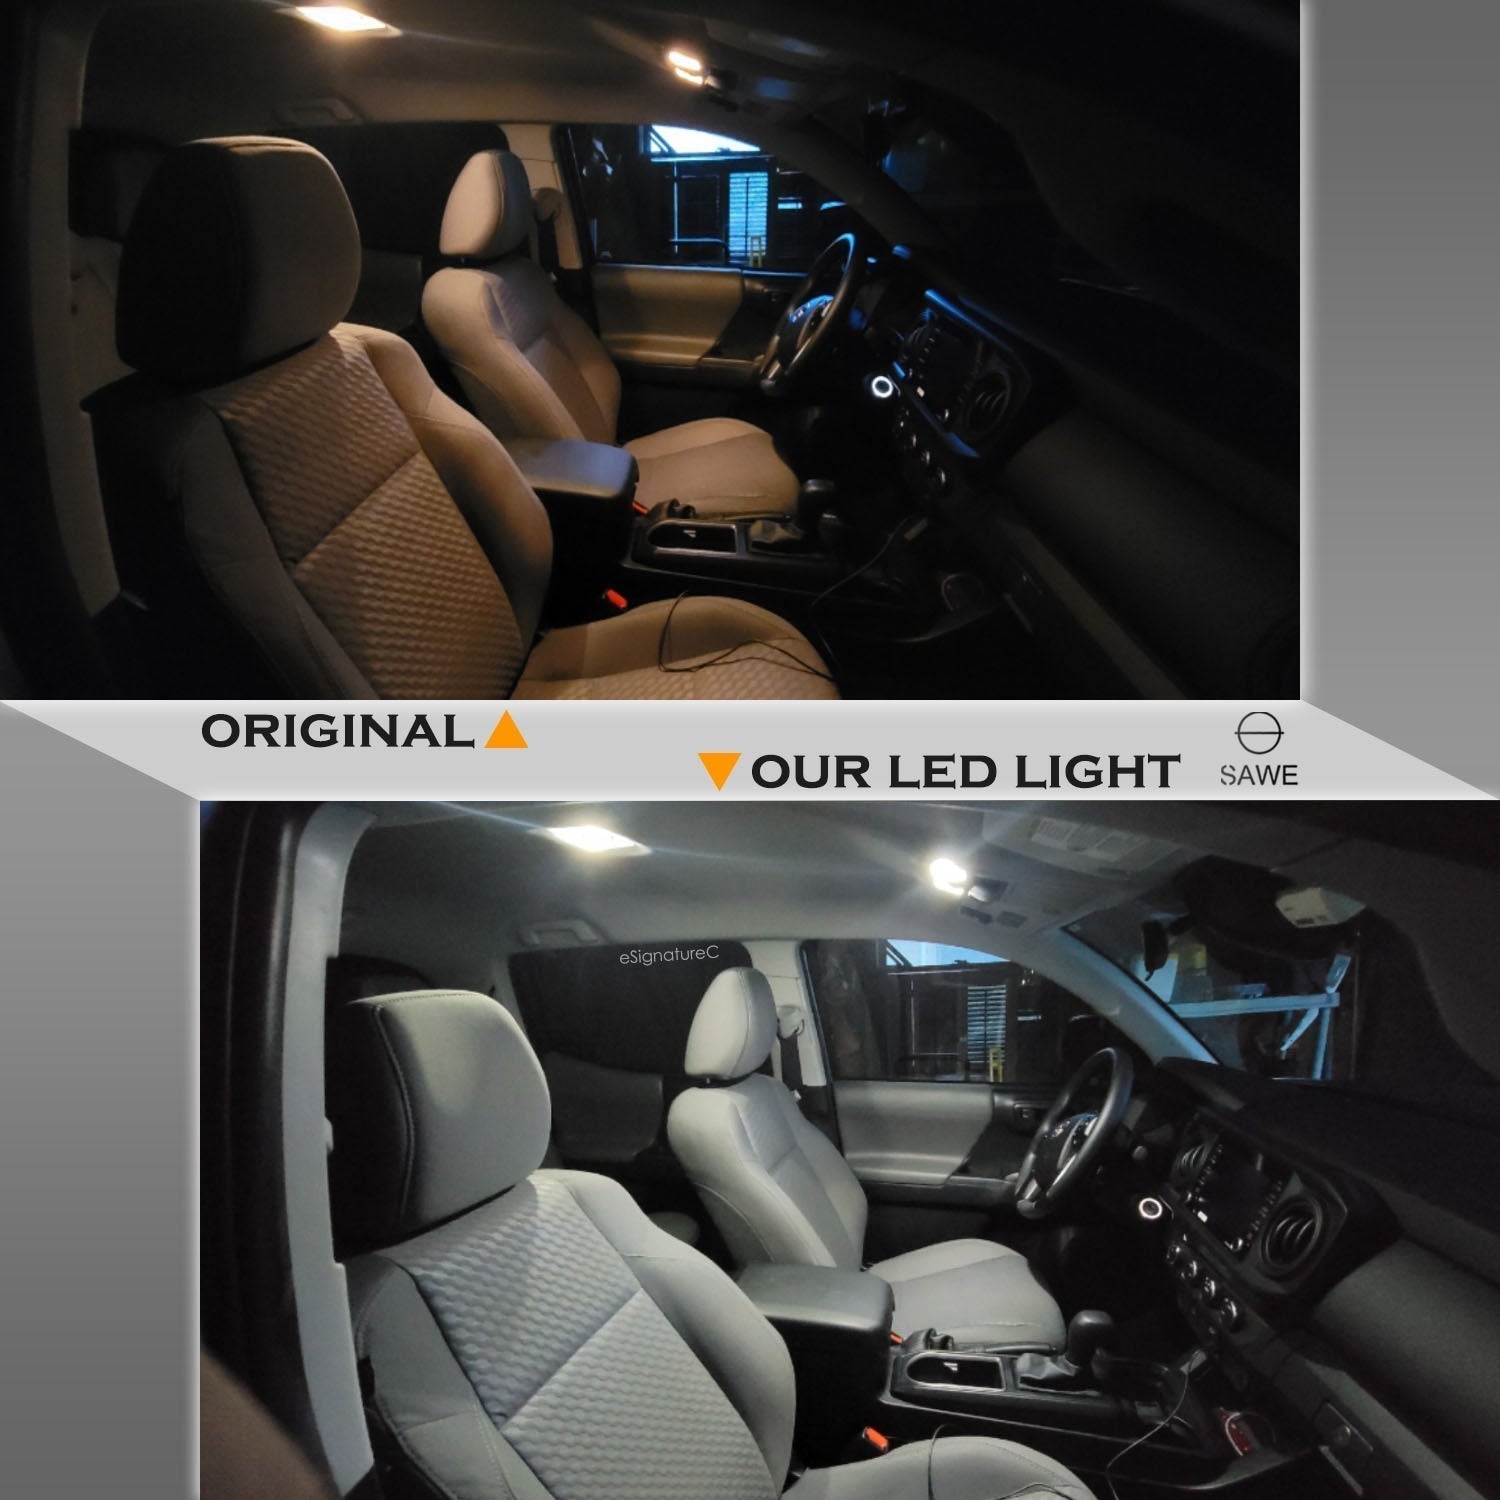 For Audi A4 S4 Interior LED Lights - Dome & Map Light Bulbs Package Kit for 2002 - 2008 - White